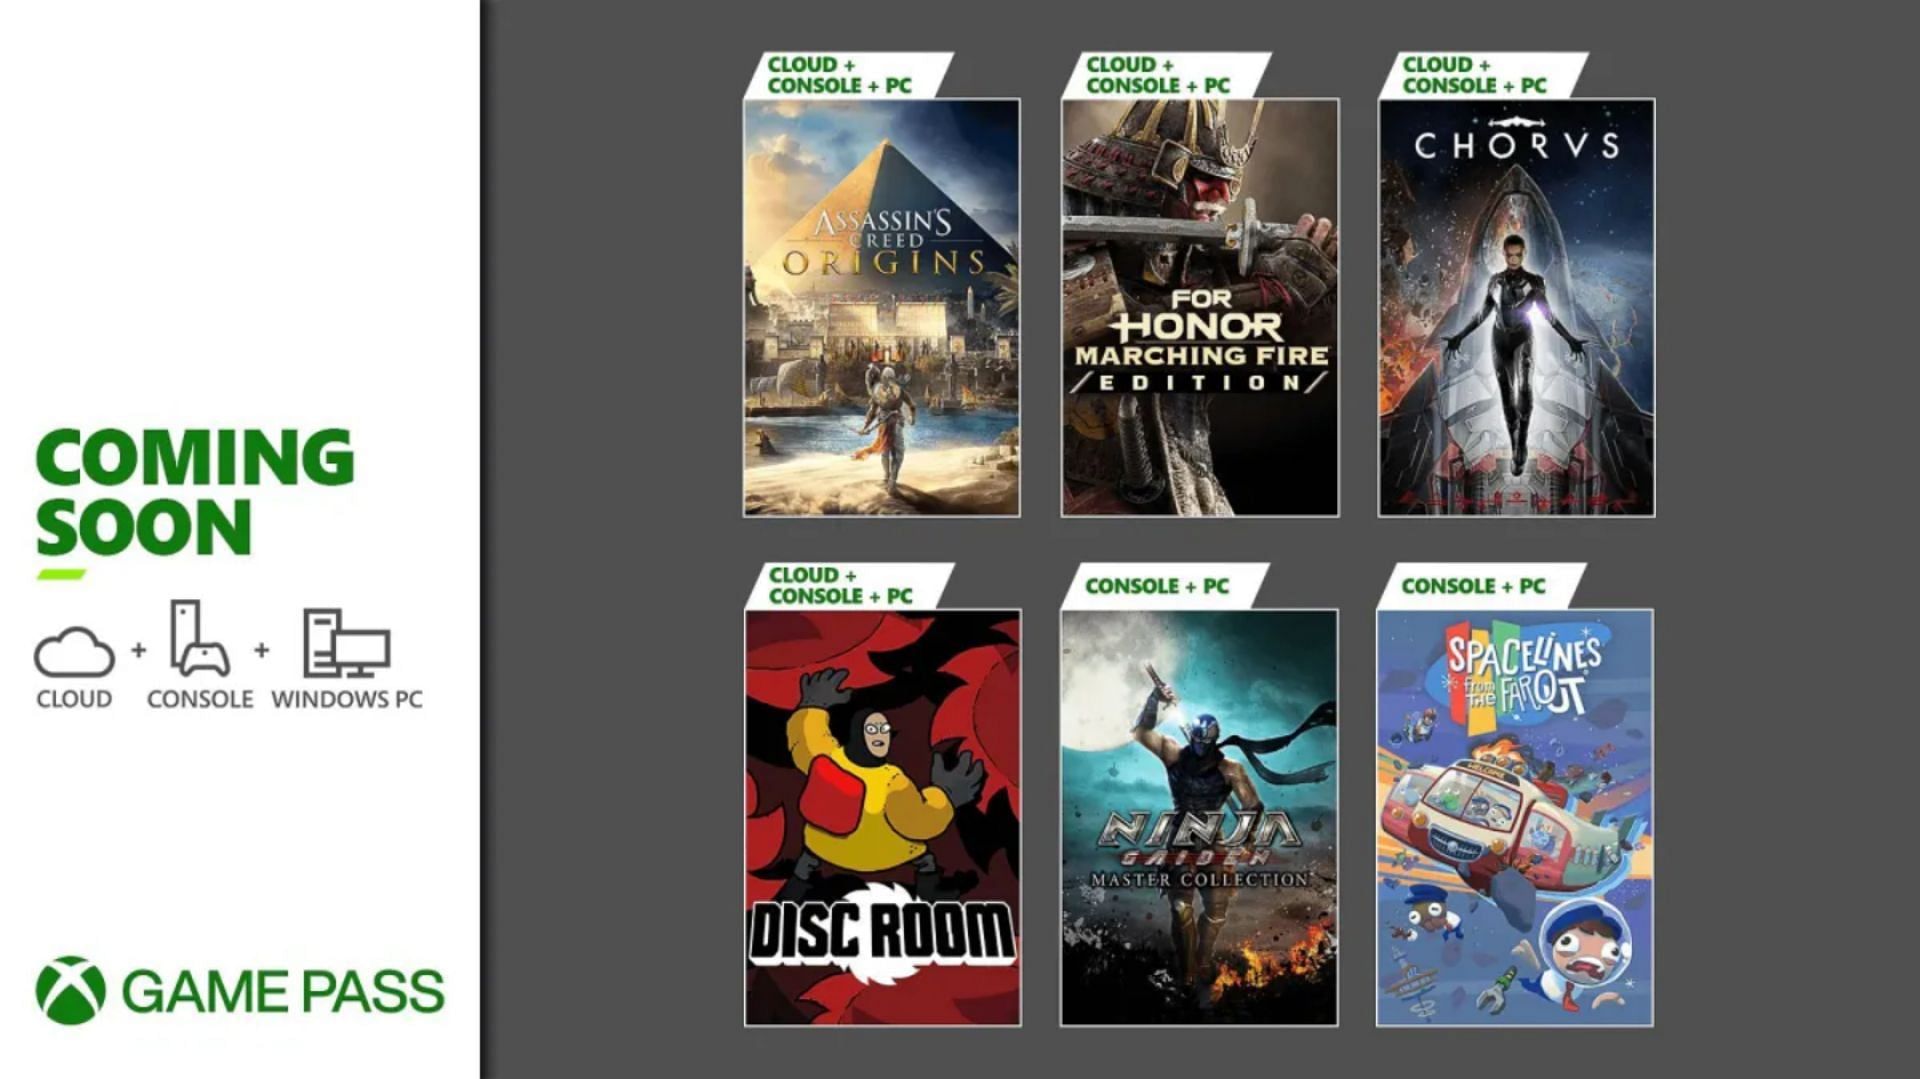 Game Pass games for June 2022 (Image by Xbox)